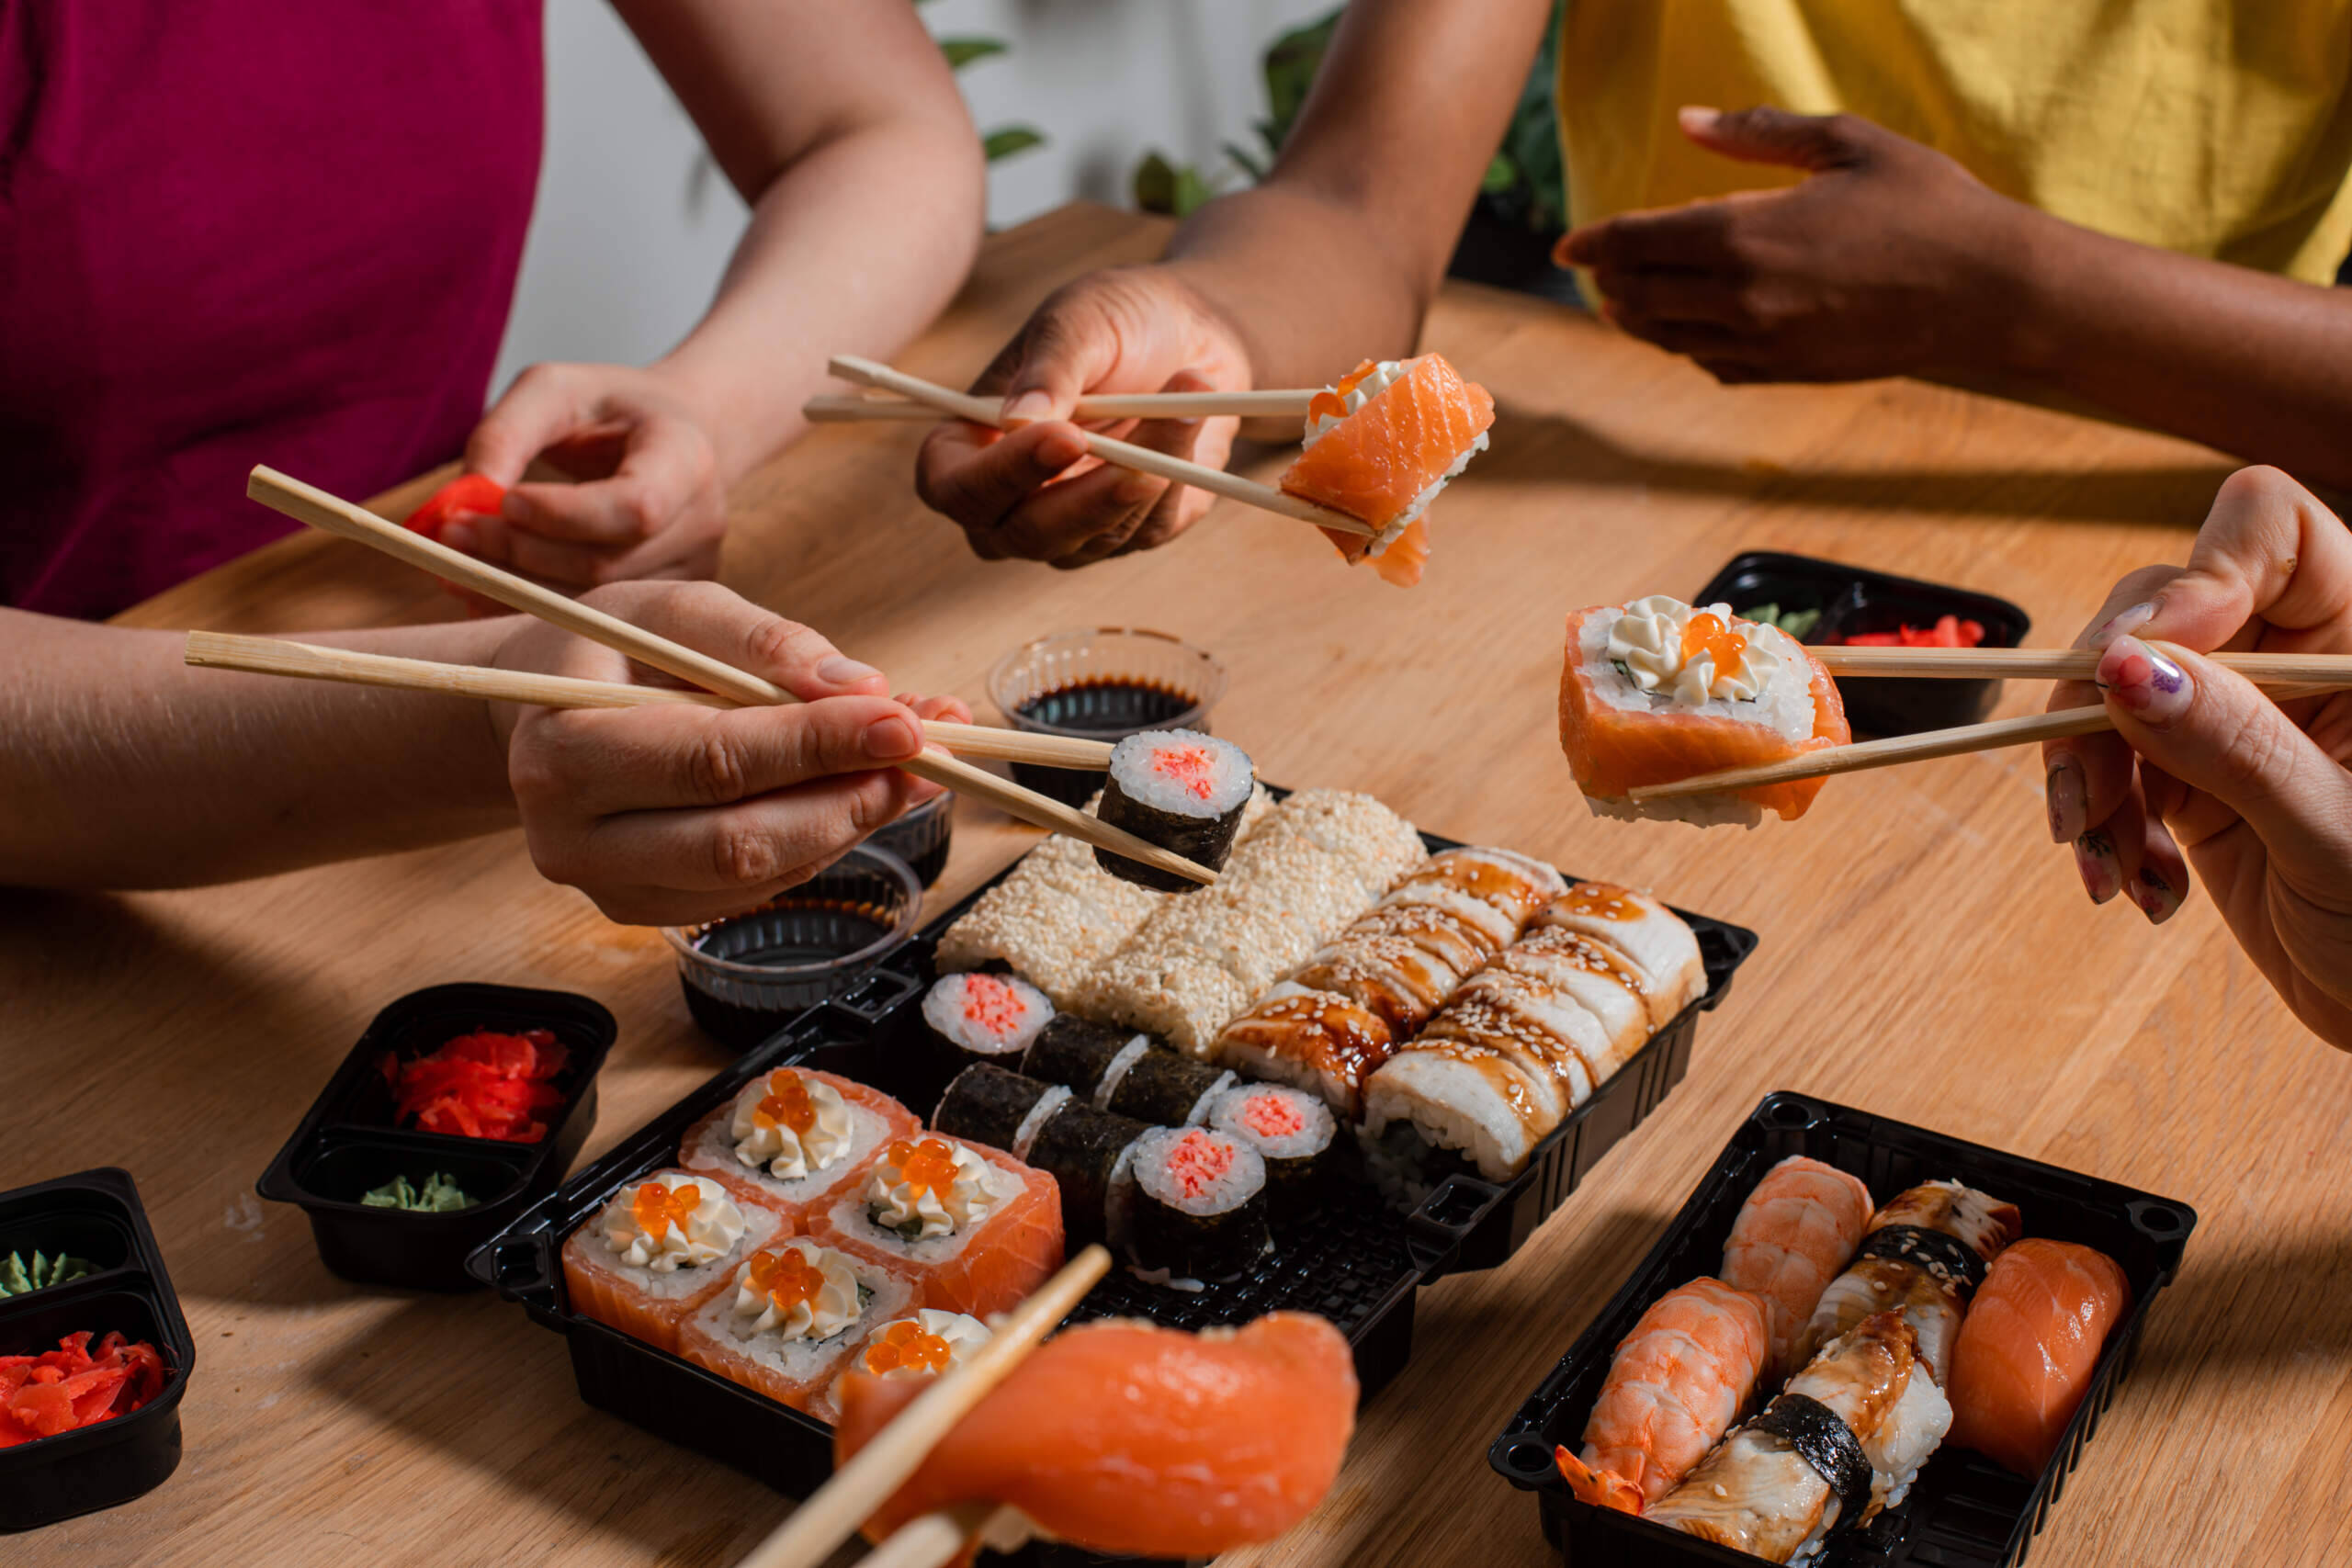 A group of people eat sushi together. (Oksana Shufrych via GettyImages)